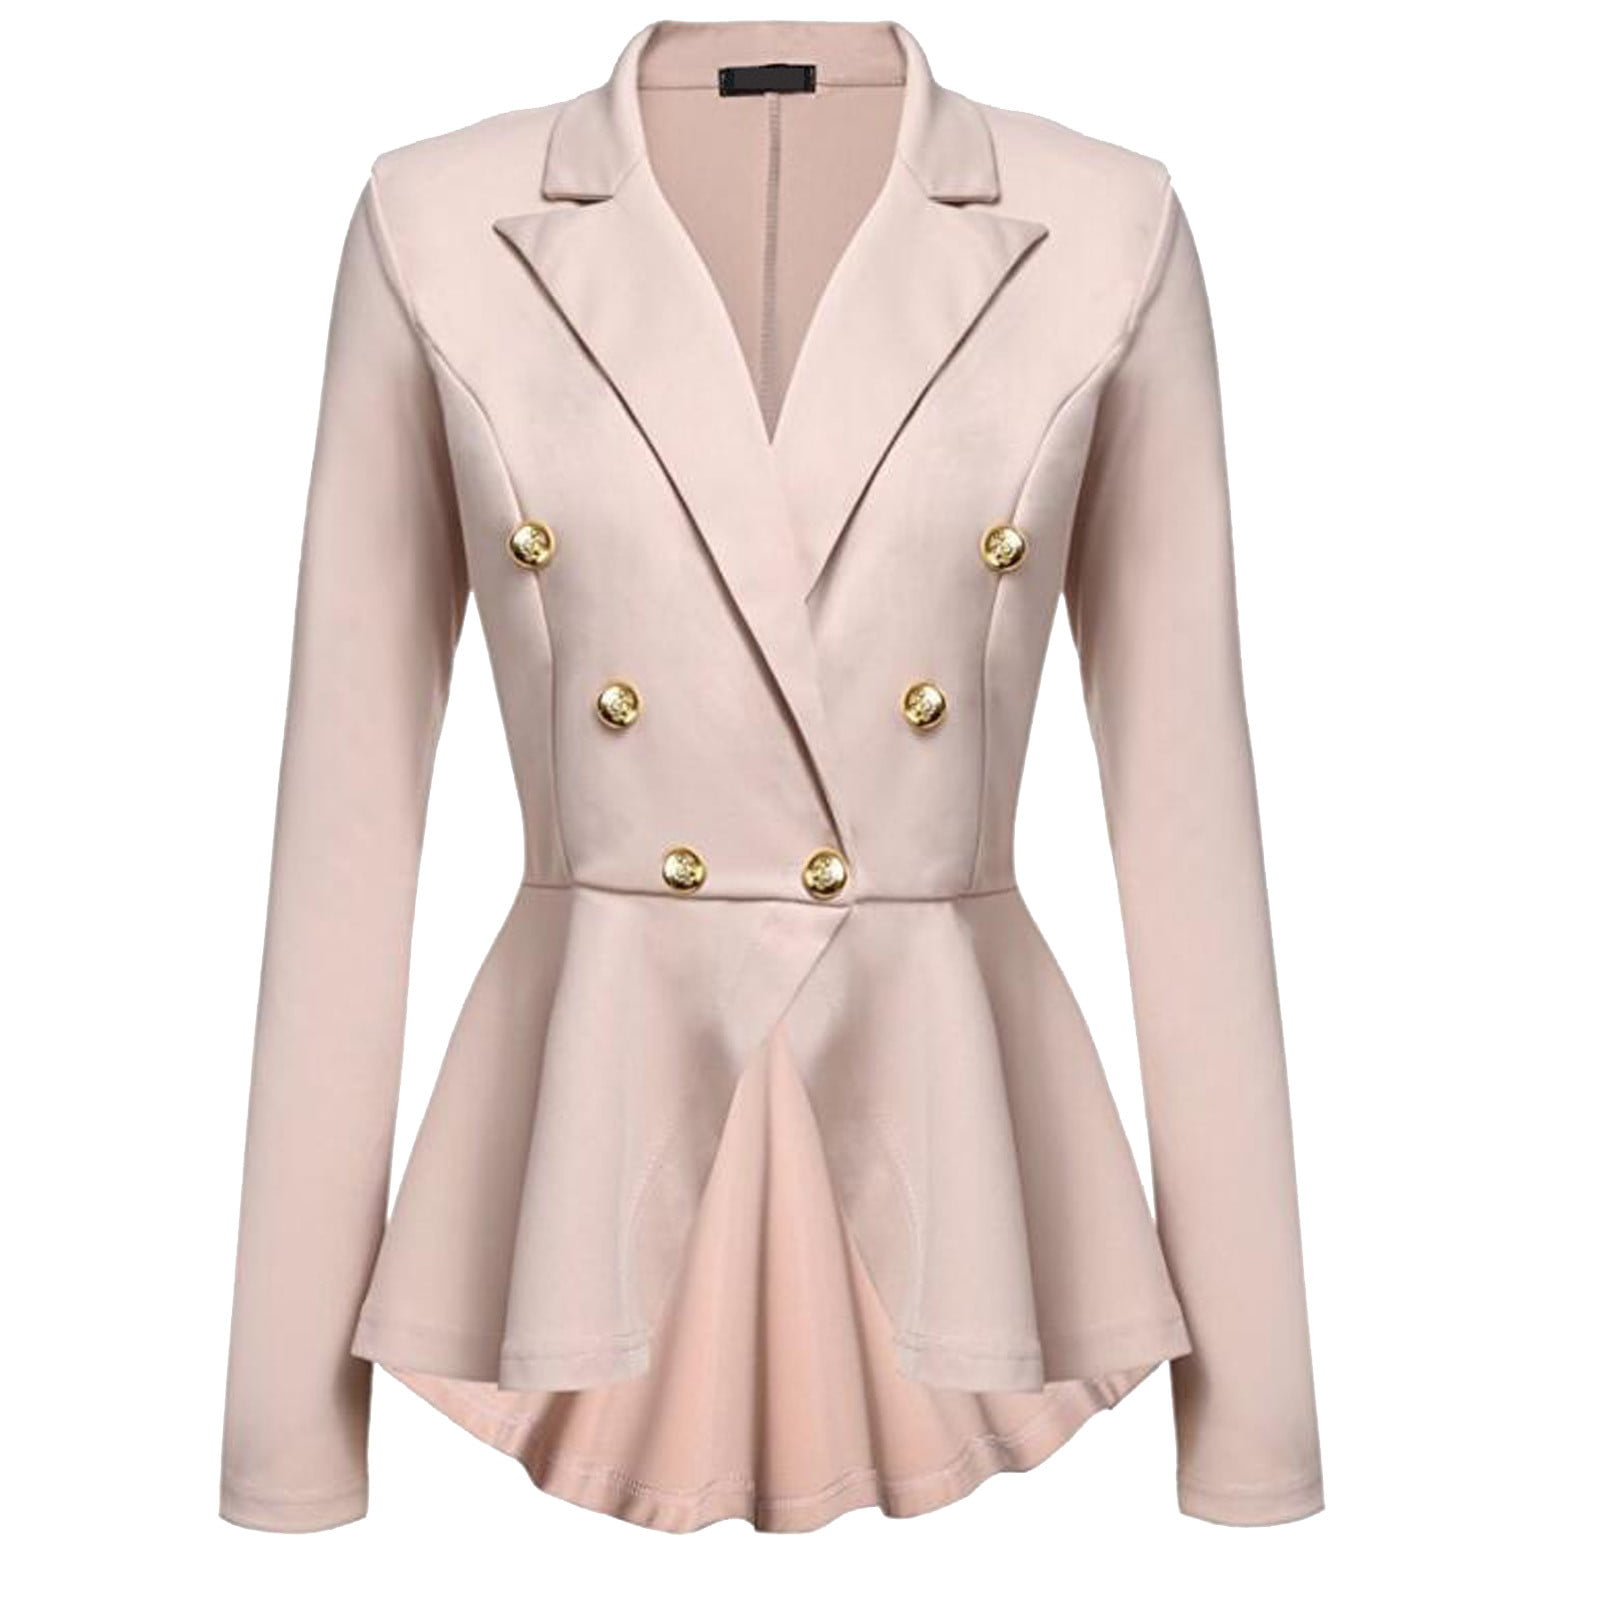 Womens Double Breasted Blazer Suit Military Jacket Lapel Slim Fit Outerwear Coat 